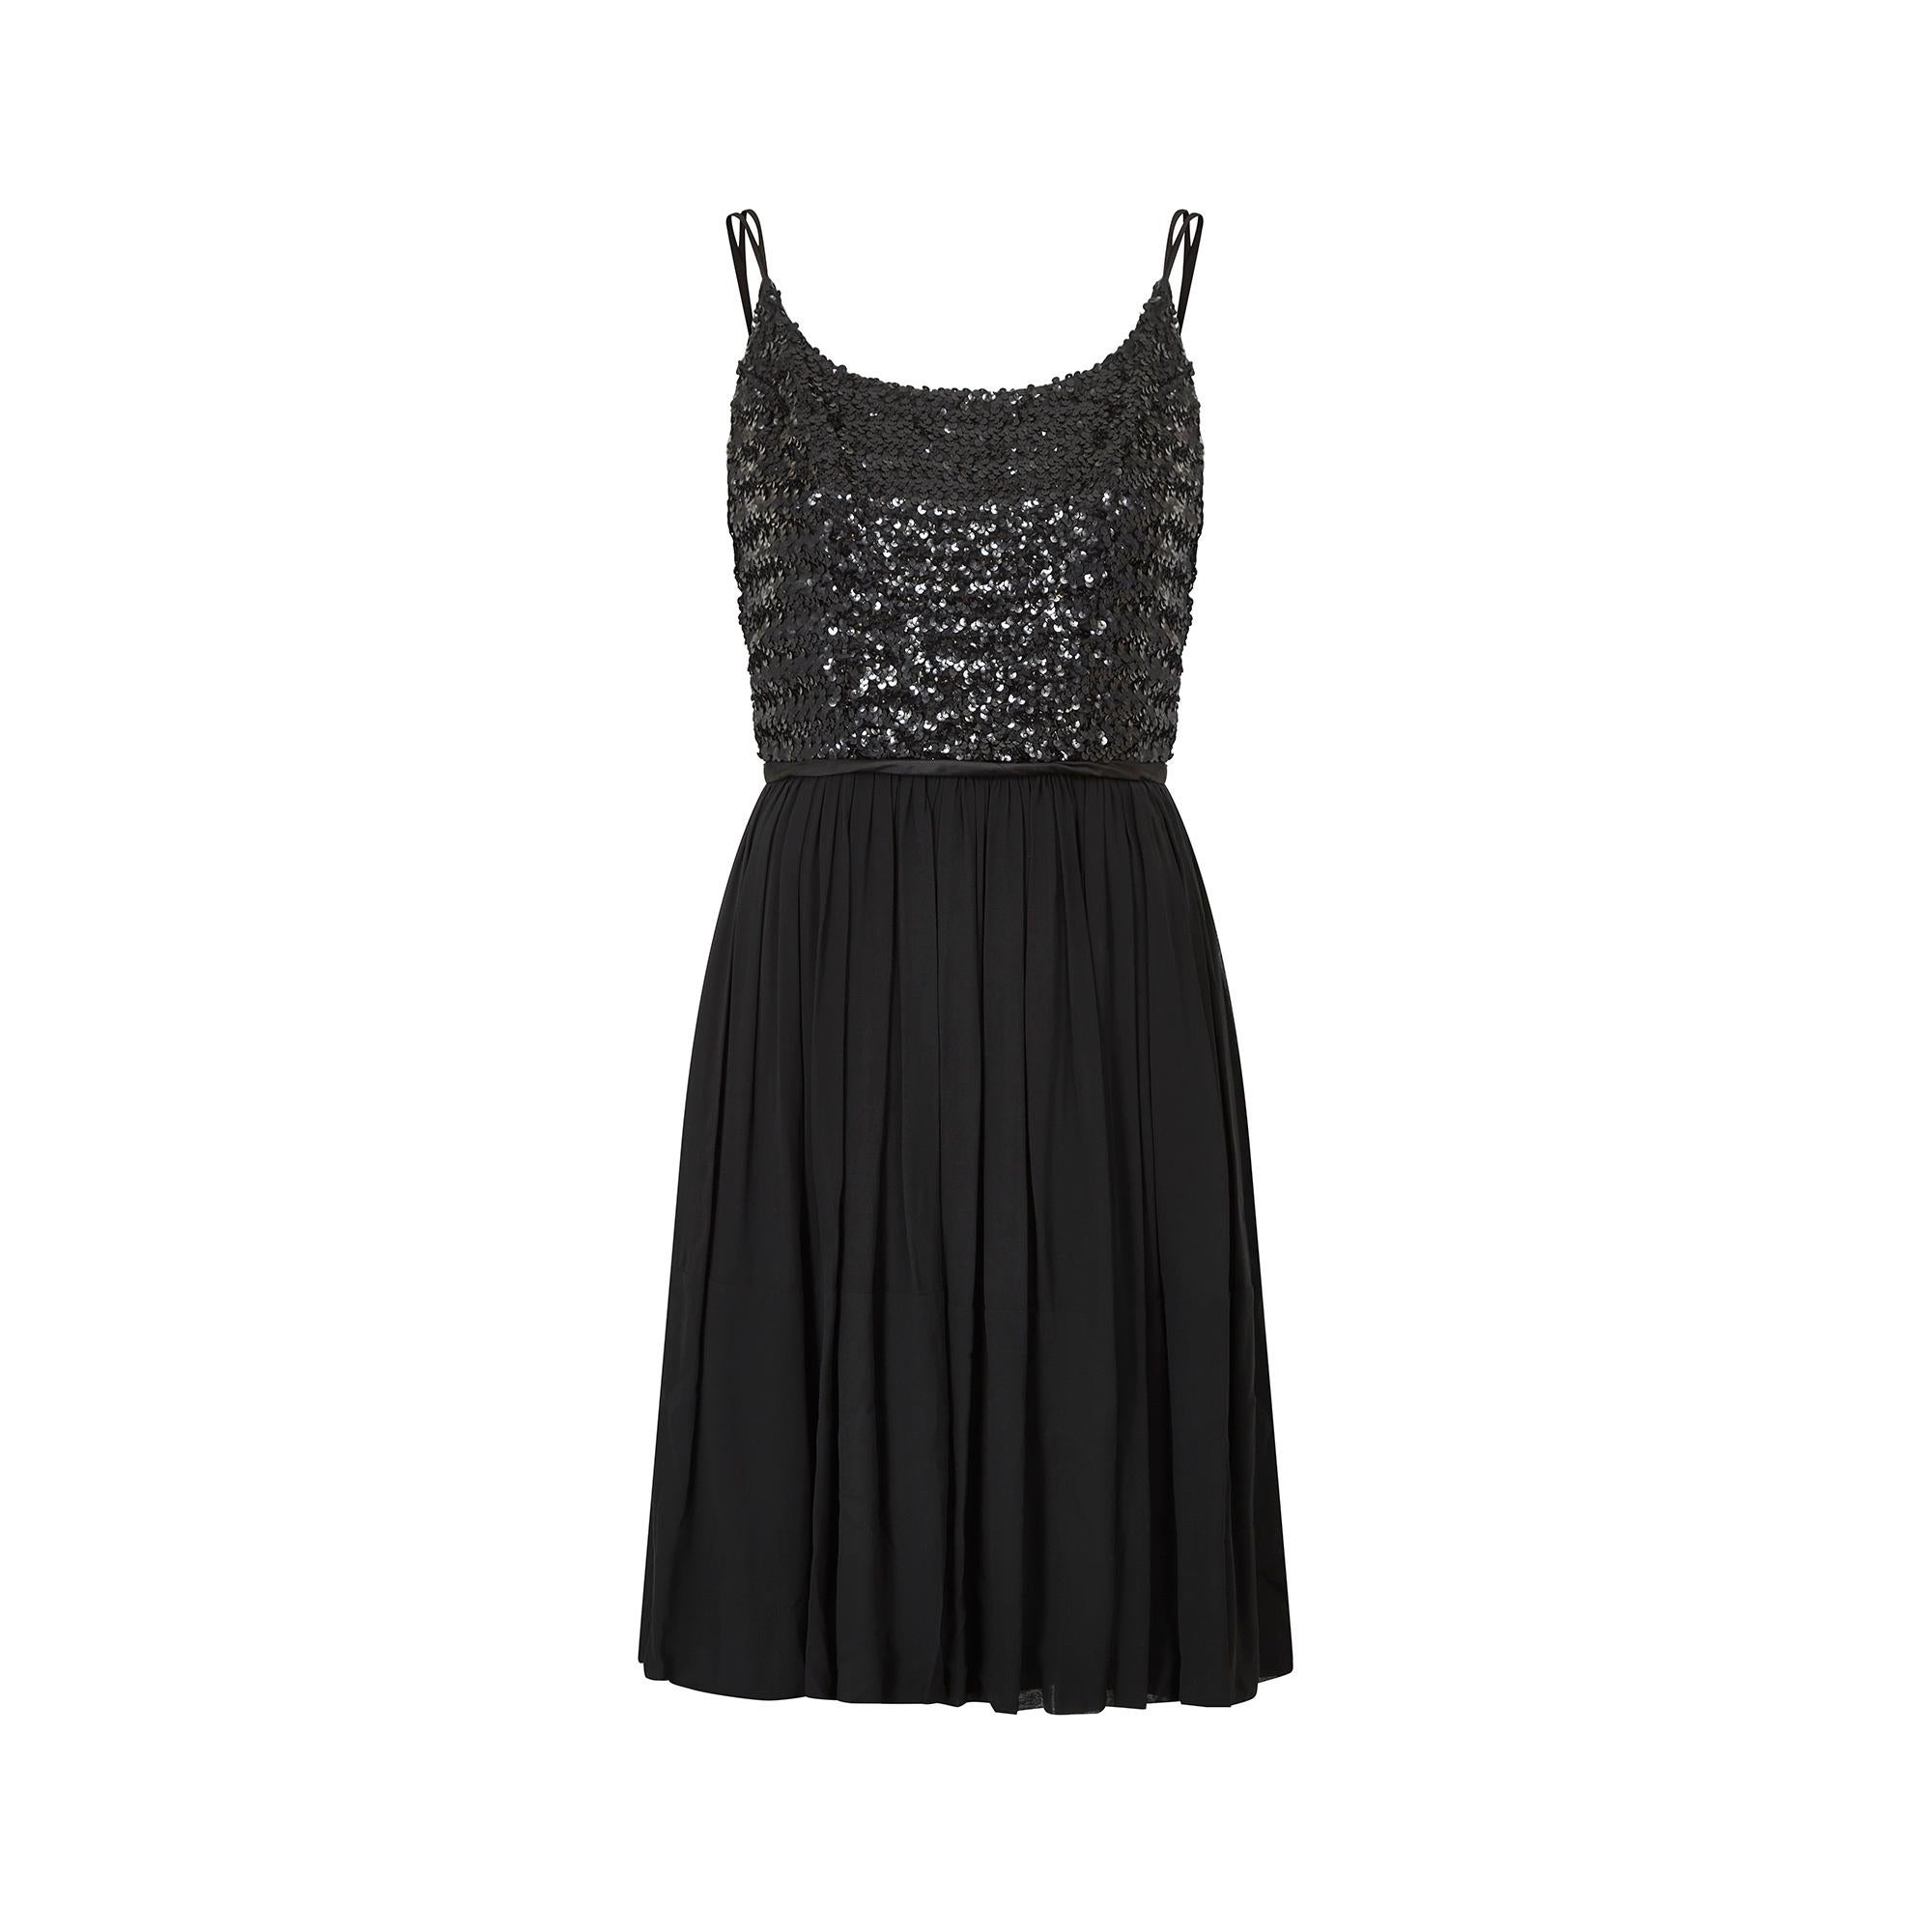 Original 1960s black sequinned dress which would make the perfect occasion dress. It features a heavily sequinned bodice with a double satin spaghetti strap and curved chest seams to create shape and support the bust. The dress fastens at the rear